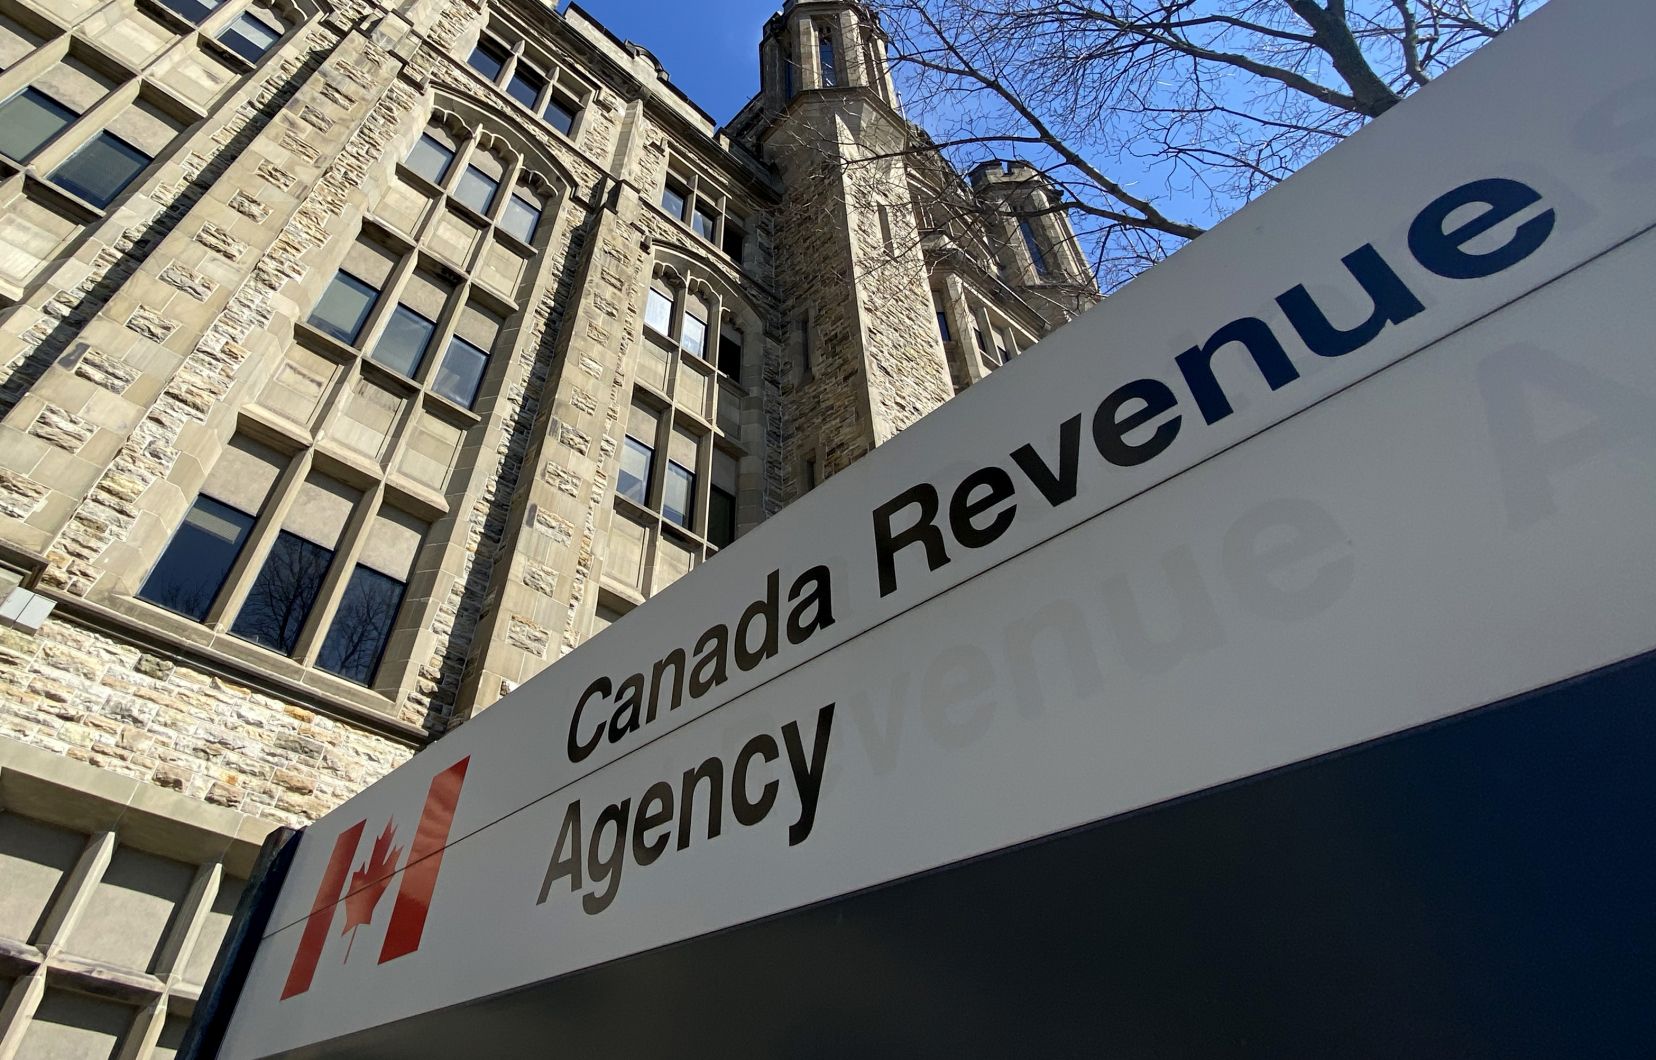 Employers make the Canada Revenue Agency mistakes

